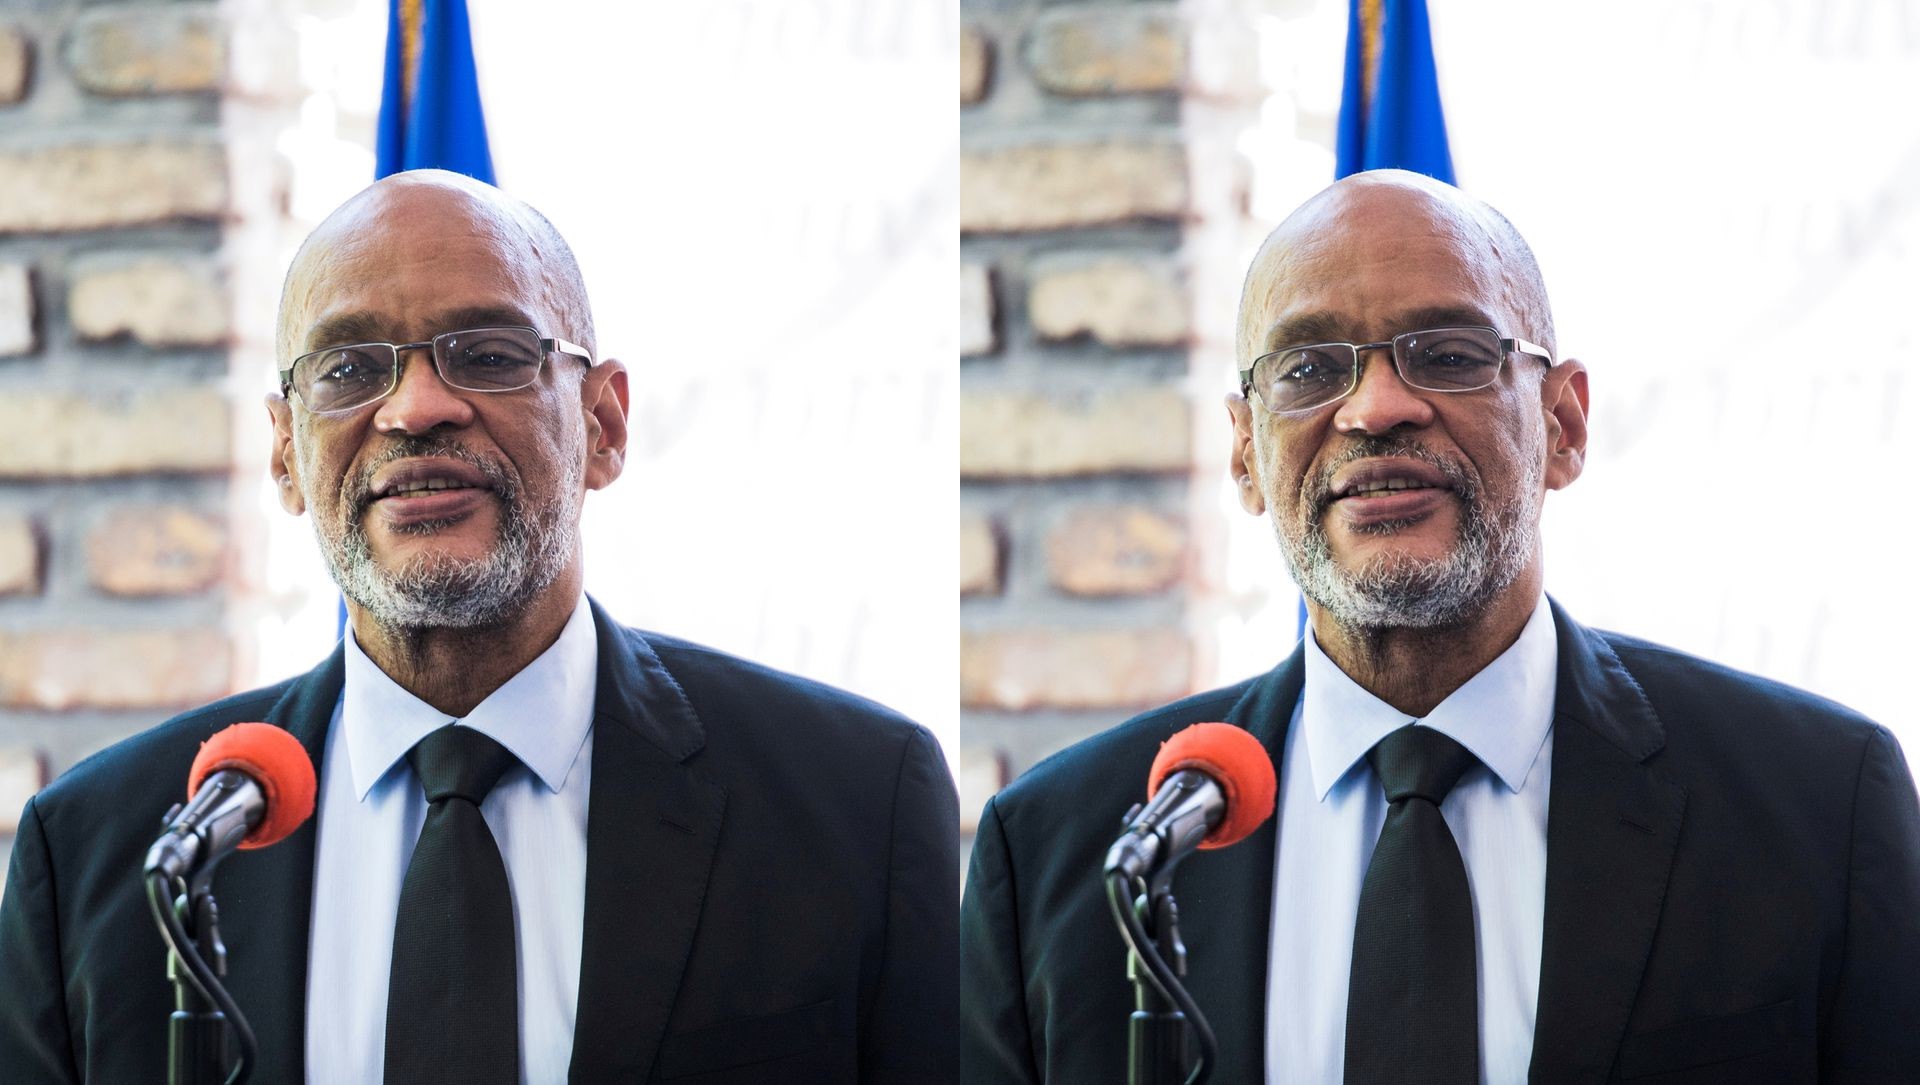 MON DIEU! Haiti Chief Prosecutor Calls For PM To Be Charged In President's Killing